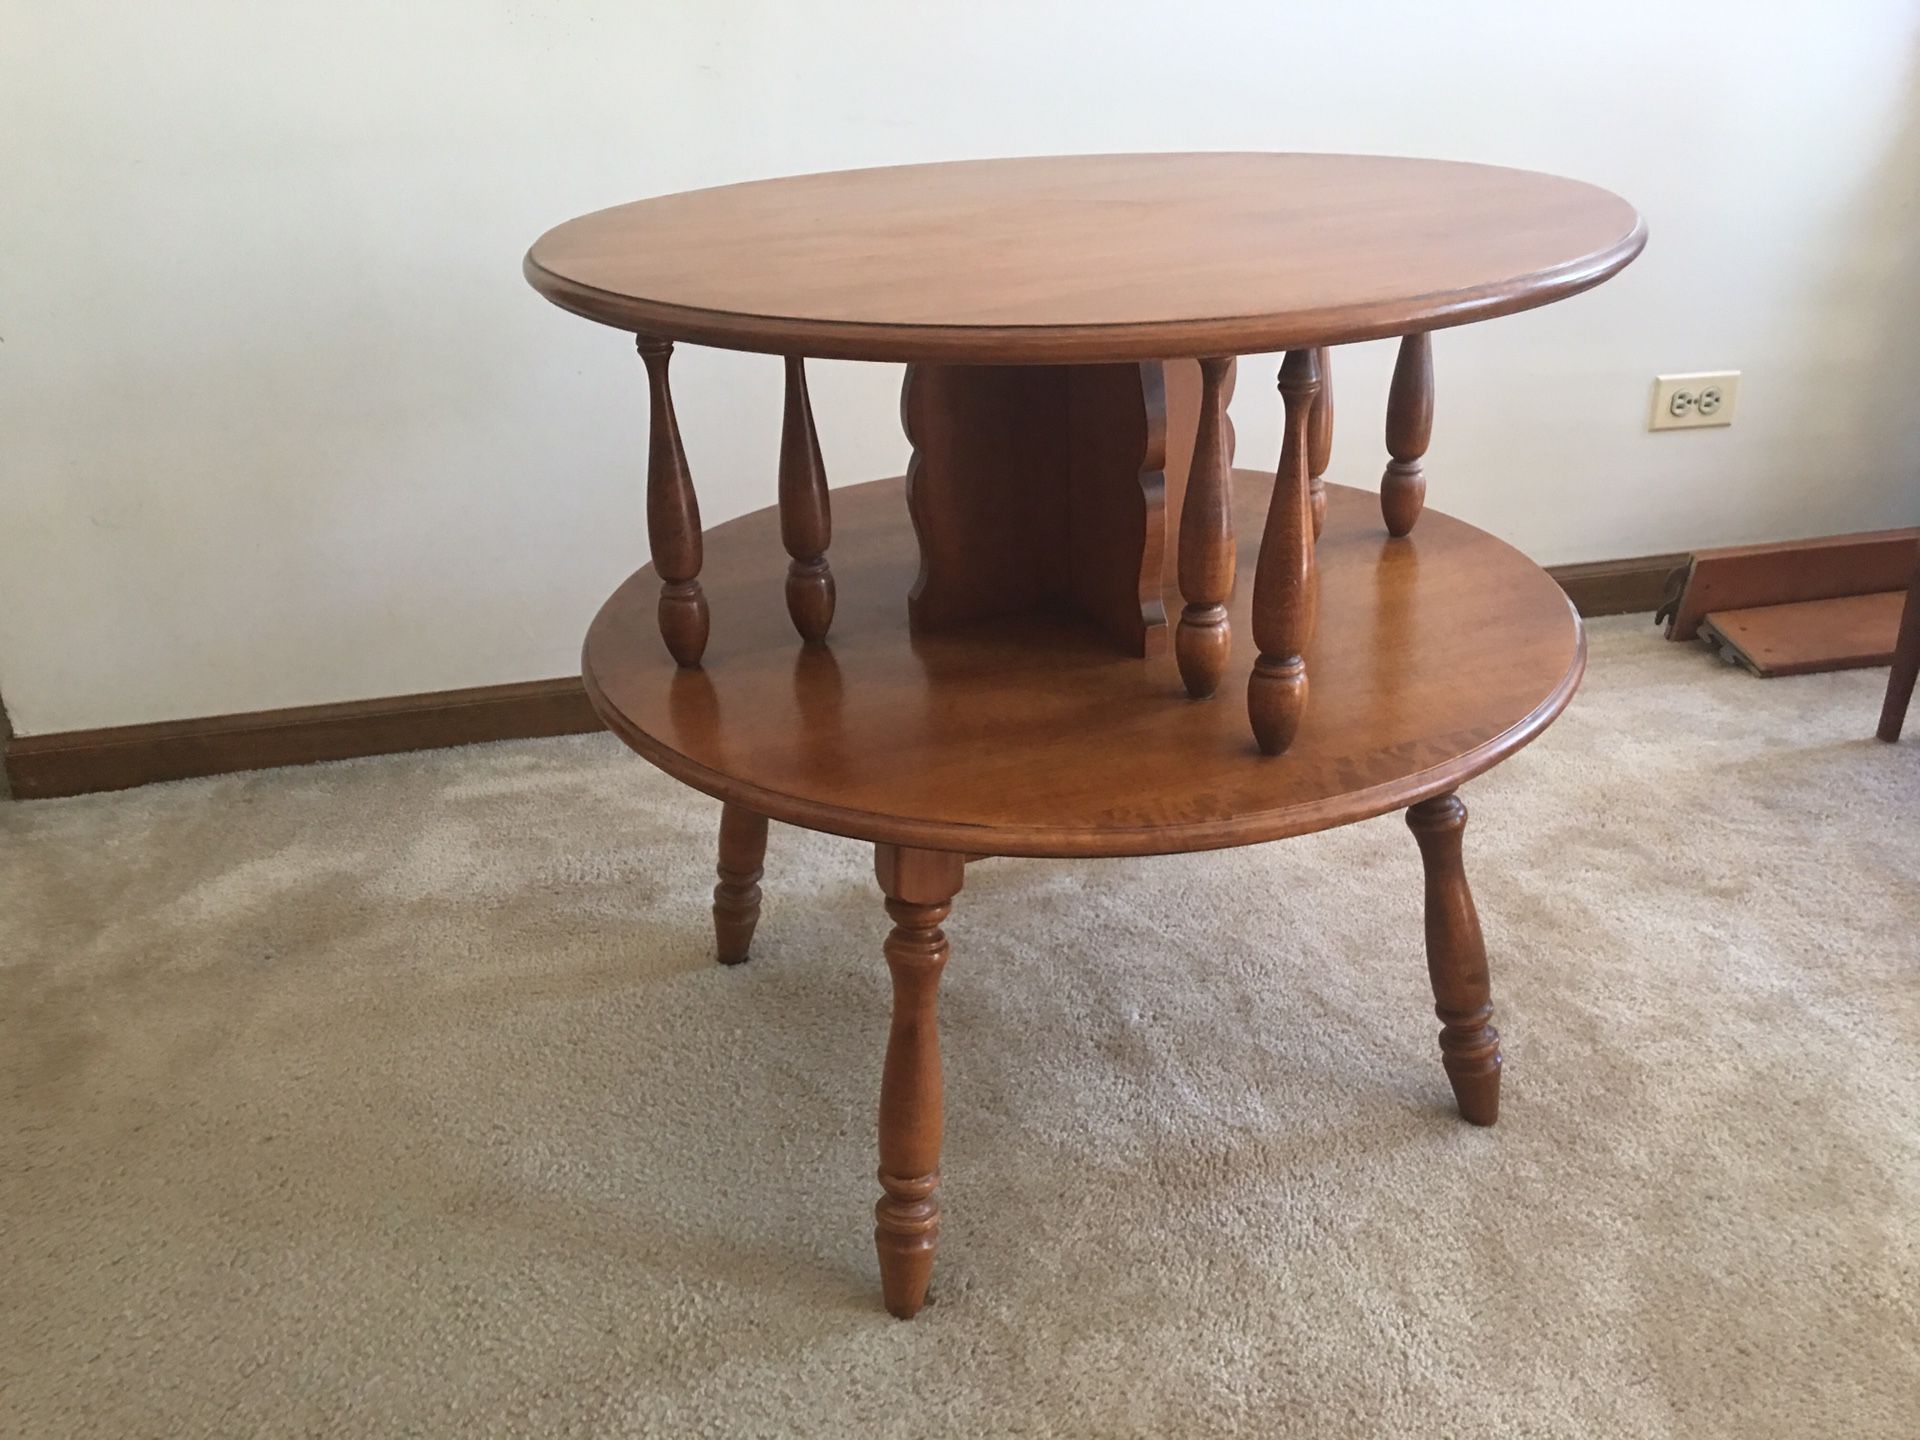 Table /for lamps/ also is a bookcase excellent condition